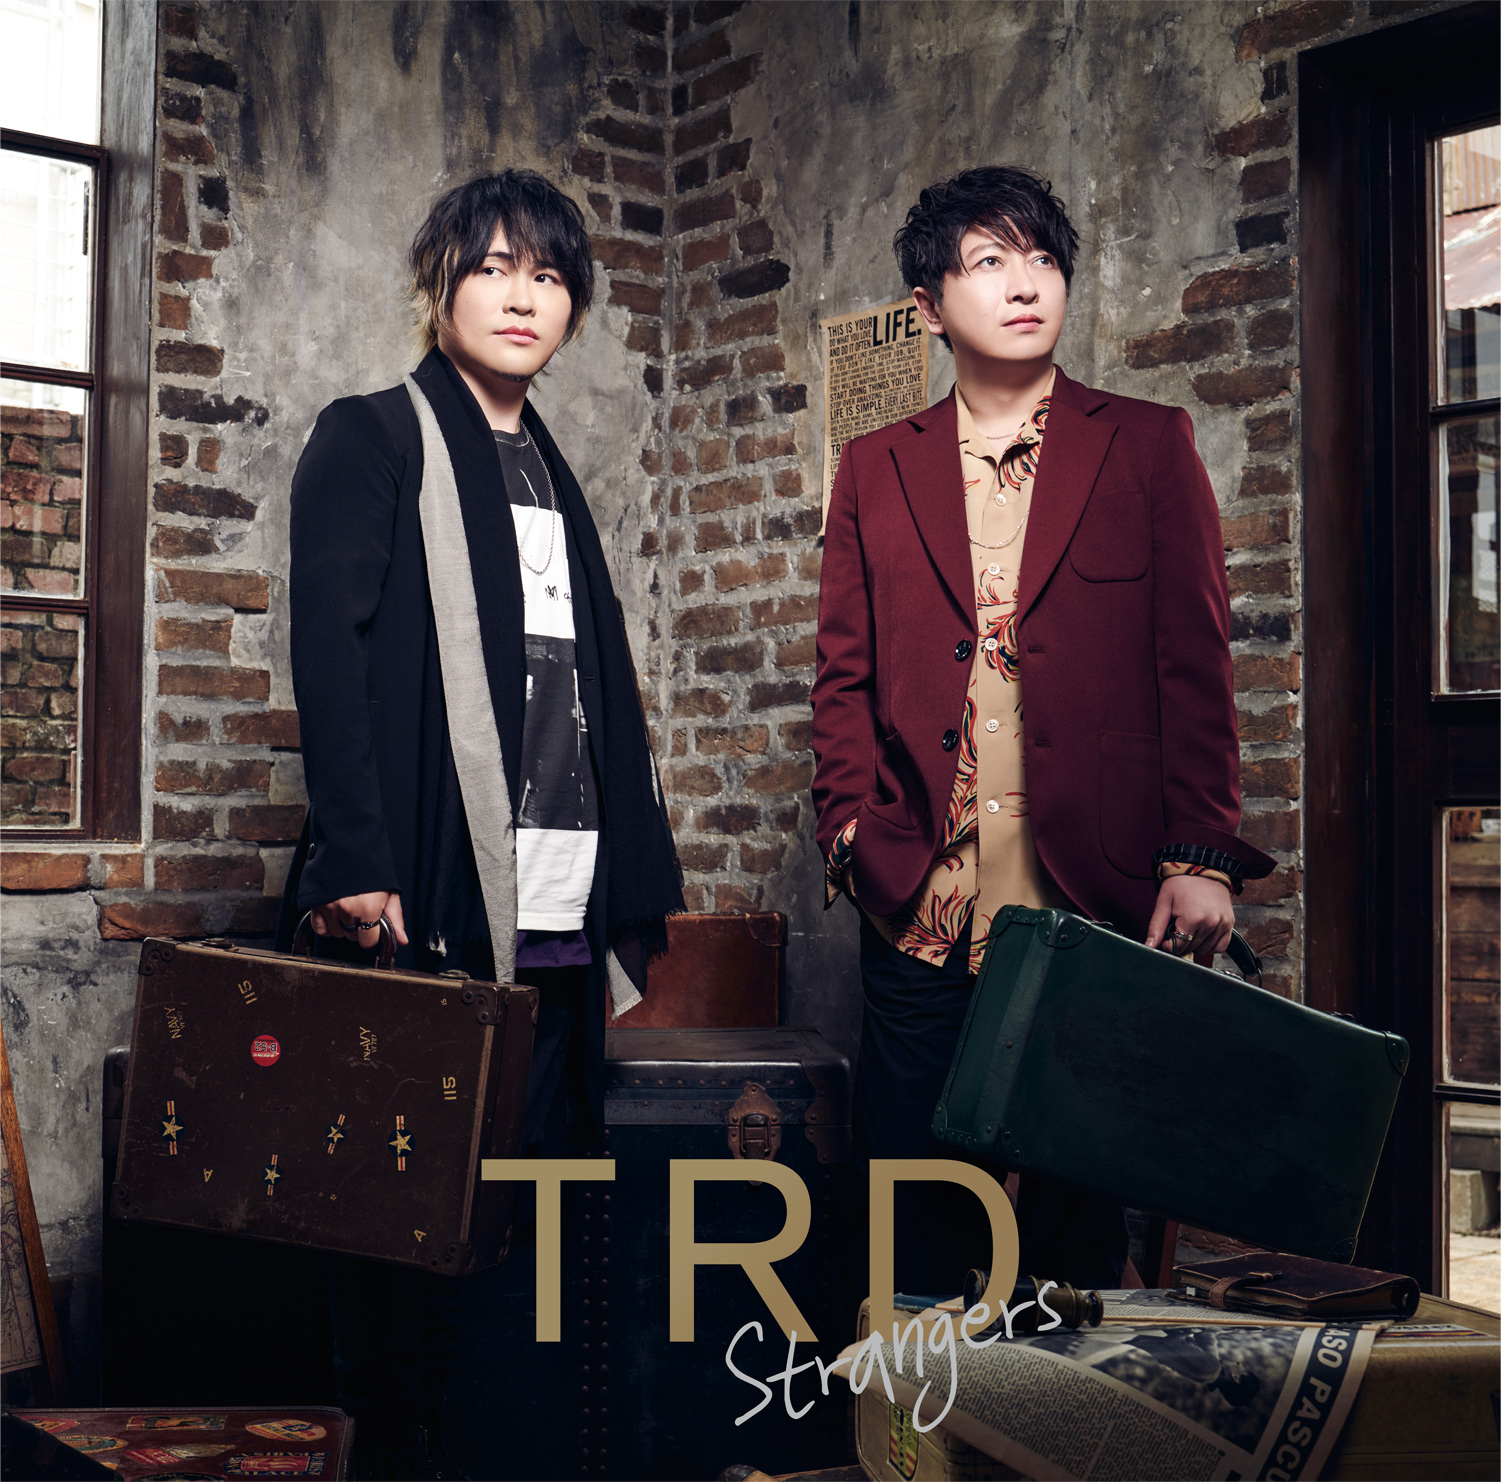 TRD 1st single”Strangers” Normal Edition（CD only)